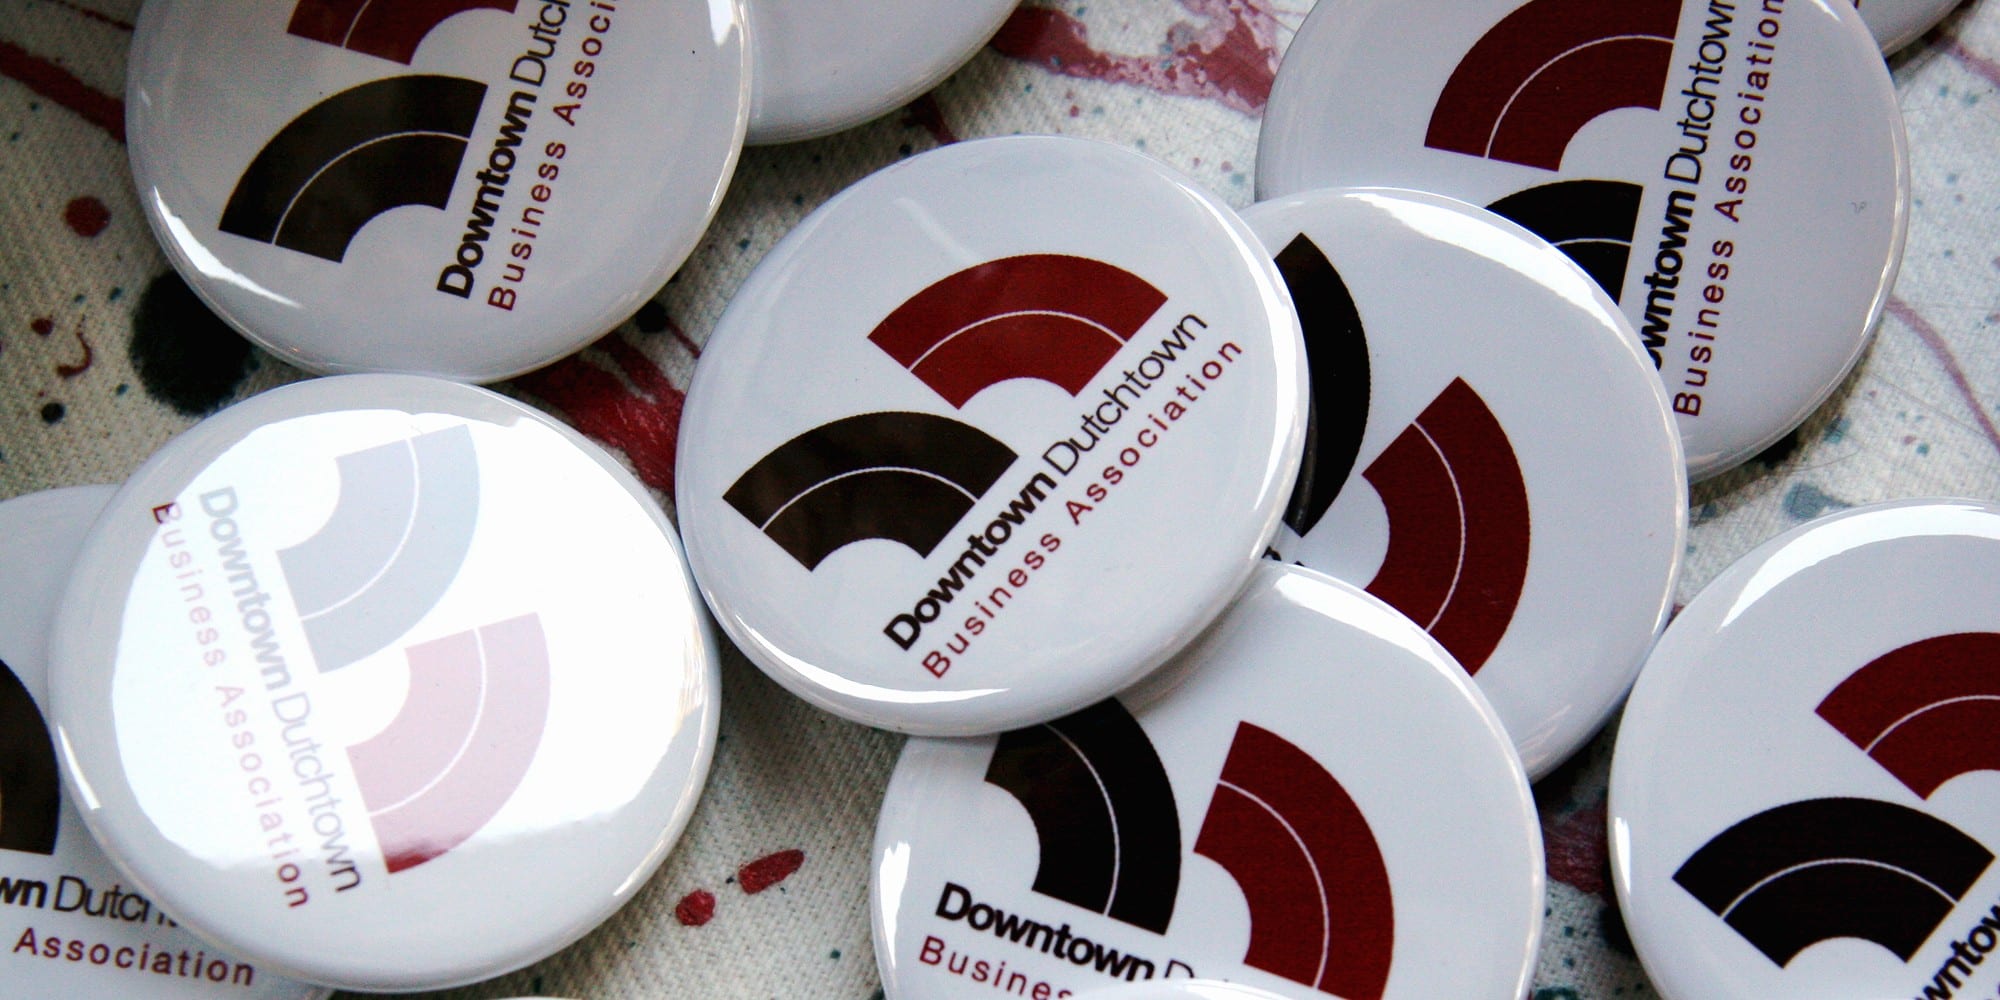 DT2 buttons. Photo by Tom Lampe.